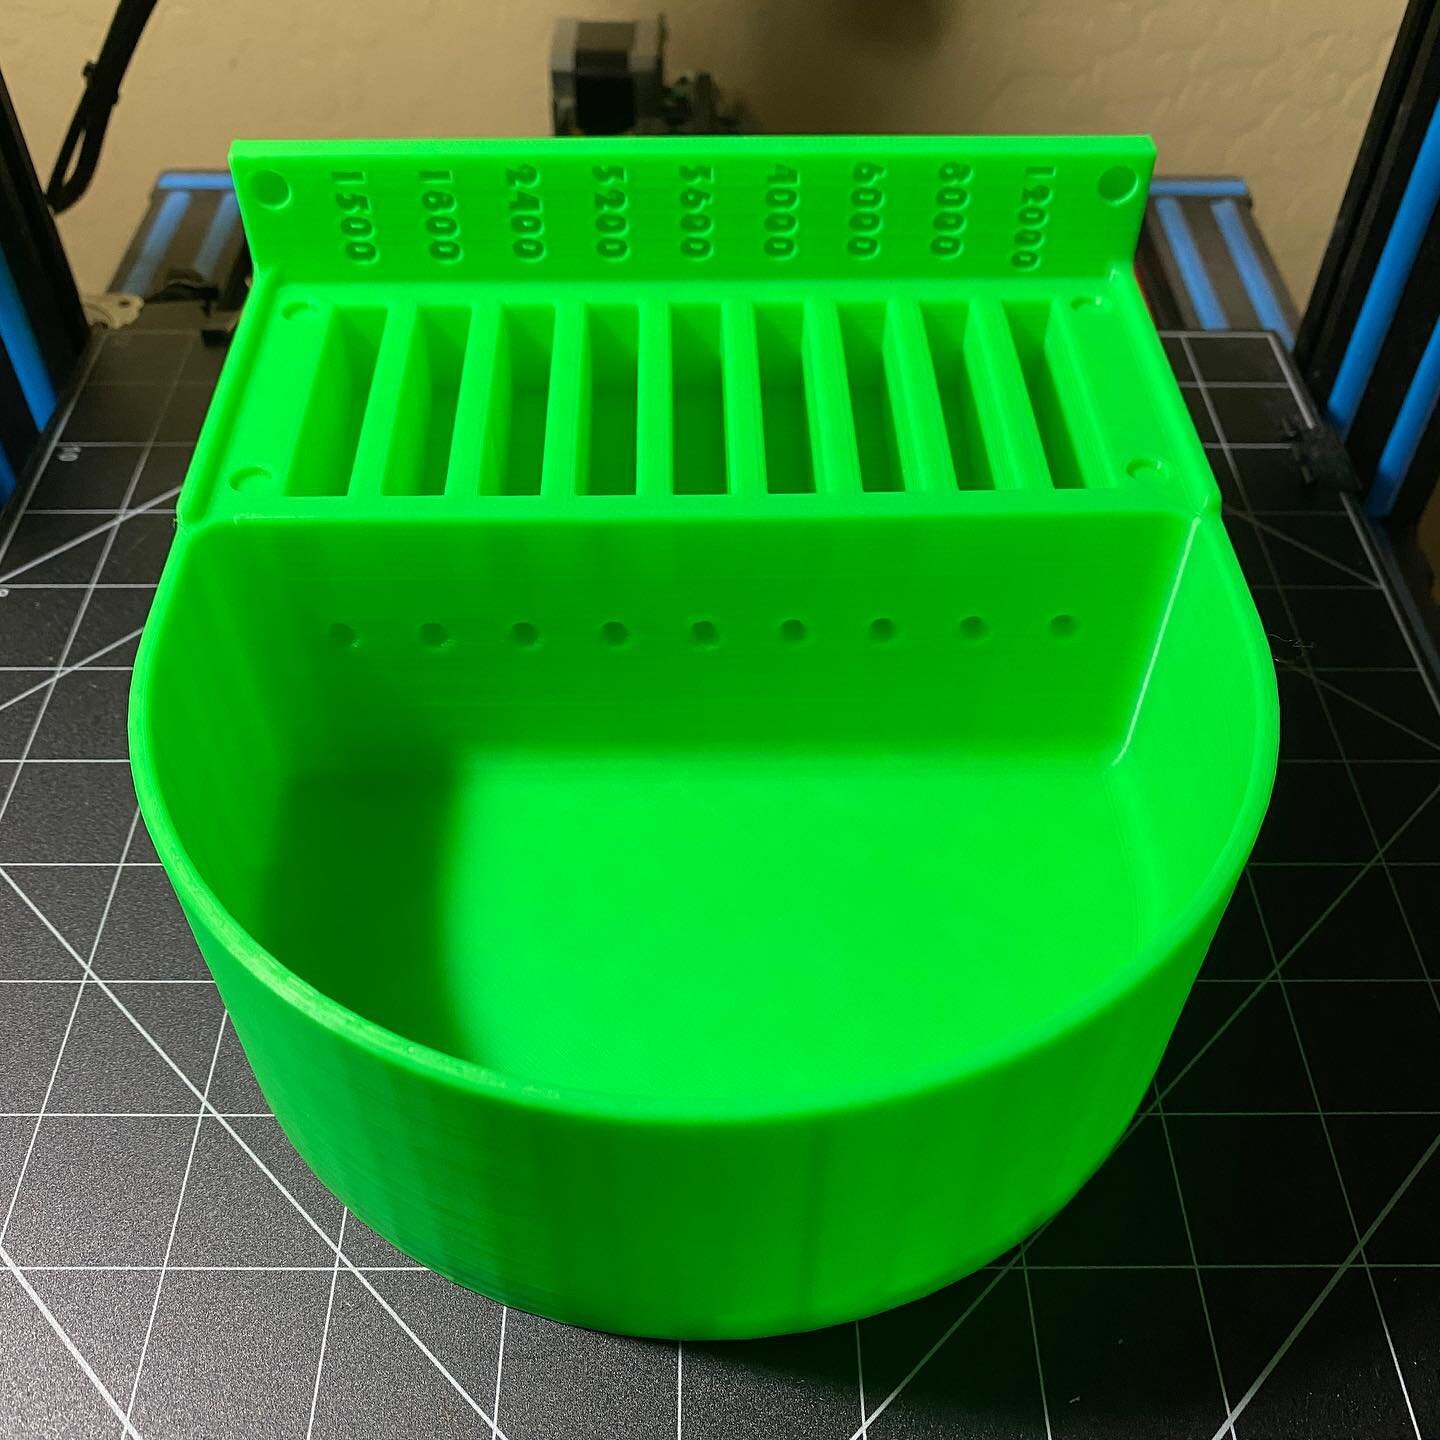 I don't know how you feel, but I consider my 3d printer a valuable tool for my shop.  I've been able to print out so many things to use in the shop.  I found this micromesh sanding station (https://www.thingiverse.com/thing:4241982) on Thingiverse.co